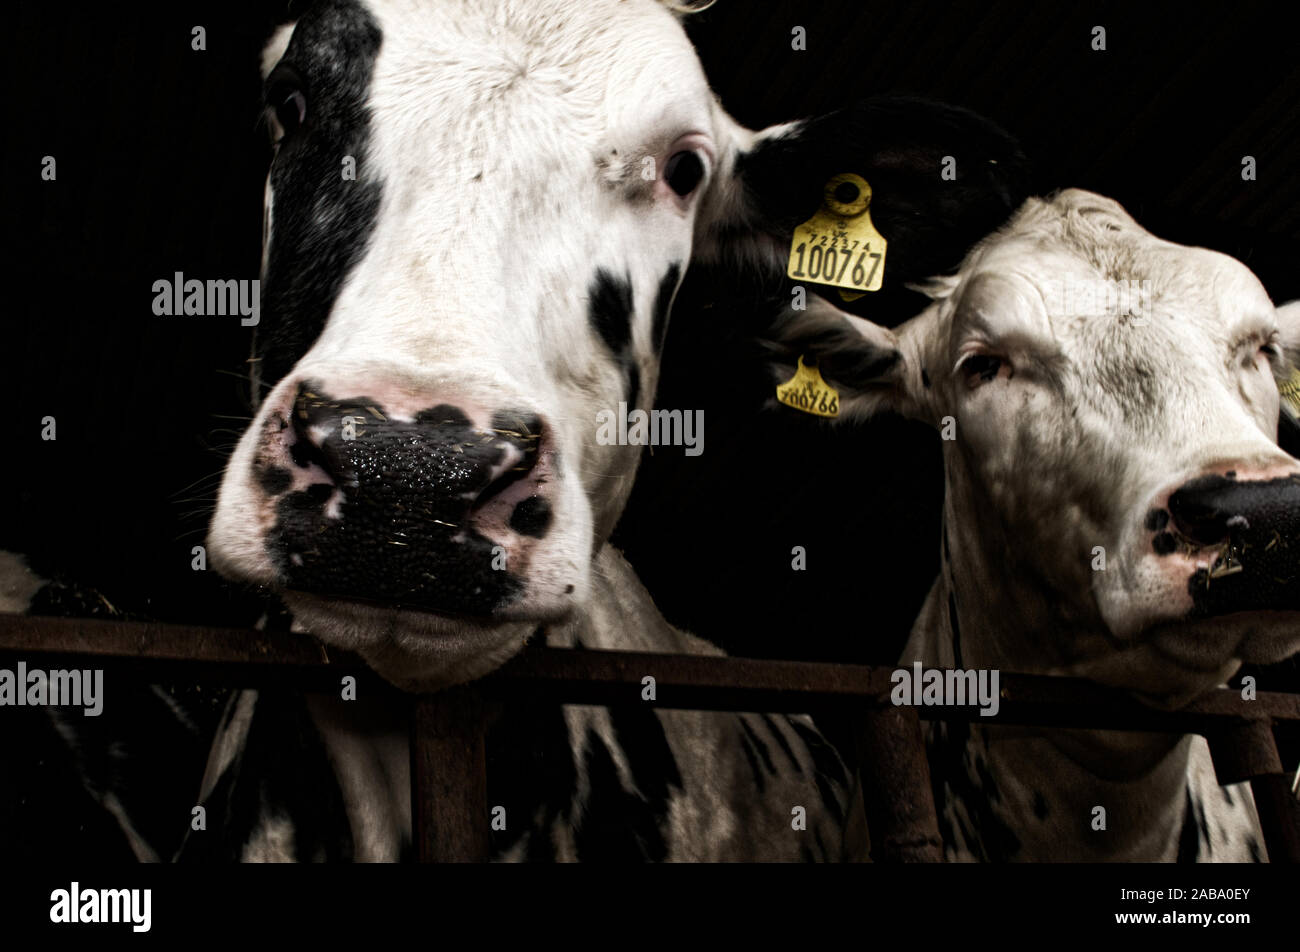 Two black and white milk cows standing behind bars and wearing electronic identification tags. Stock Photo